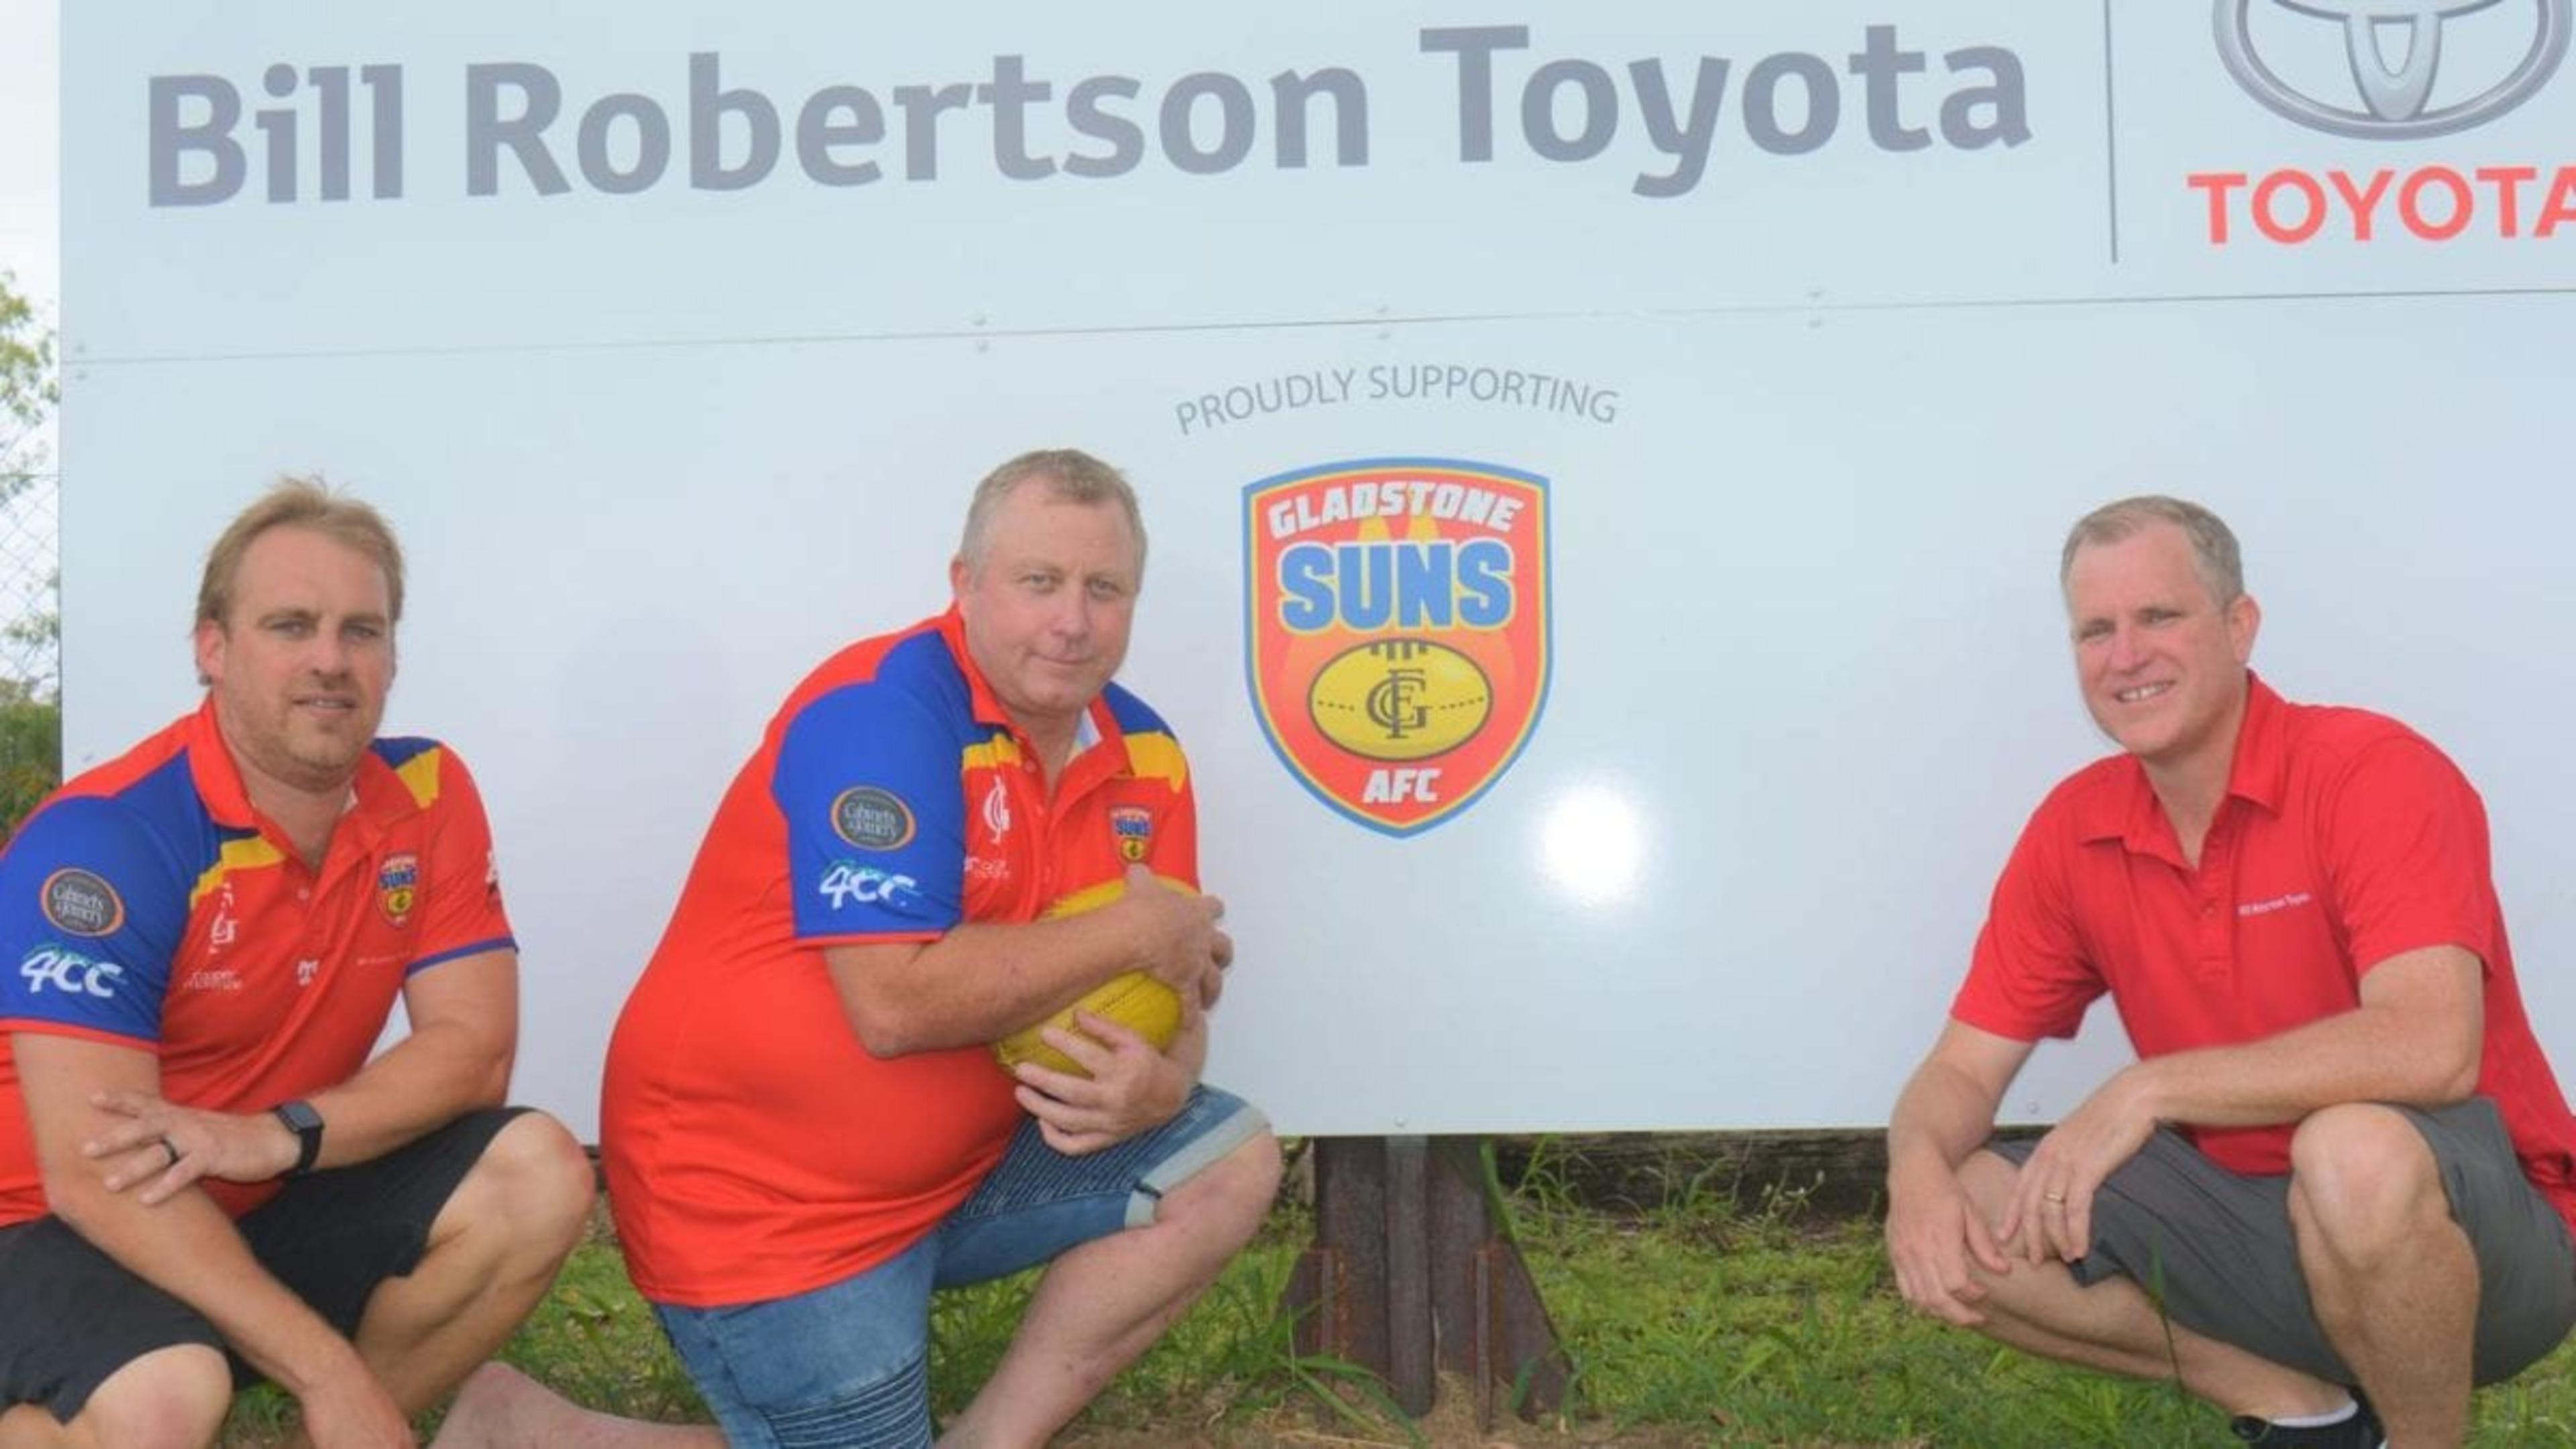 Bill Robertson Toyota Gladstone Suns get their man to lead revival featured image